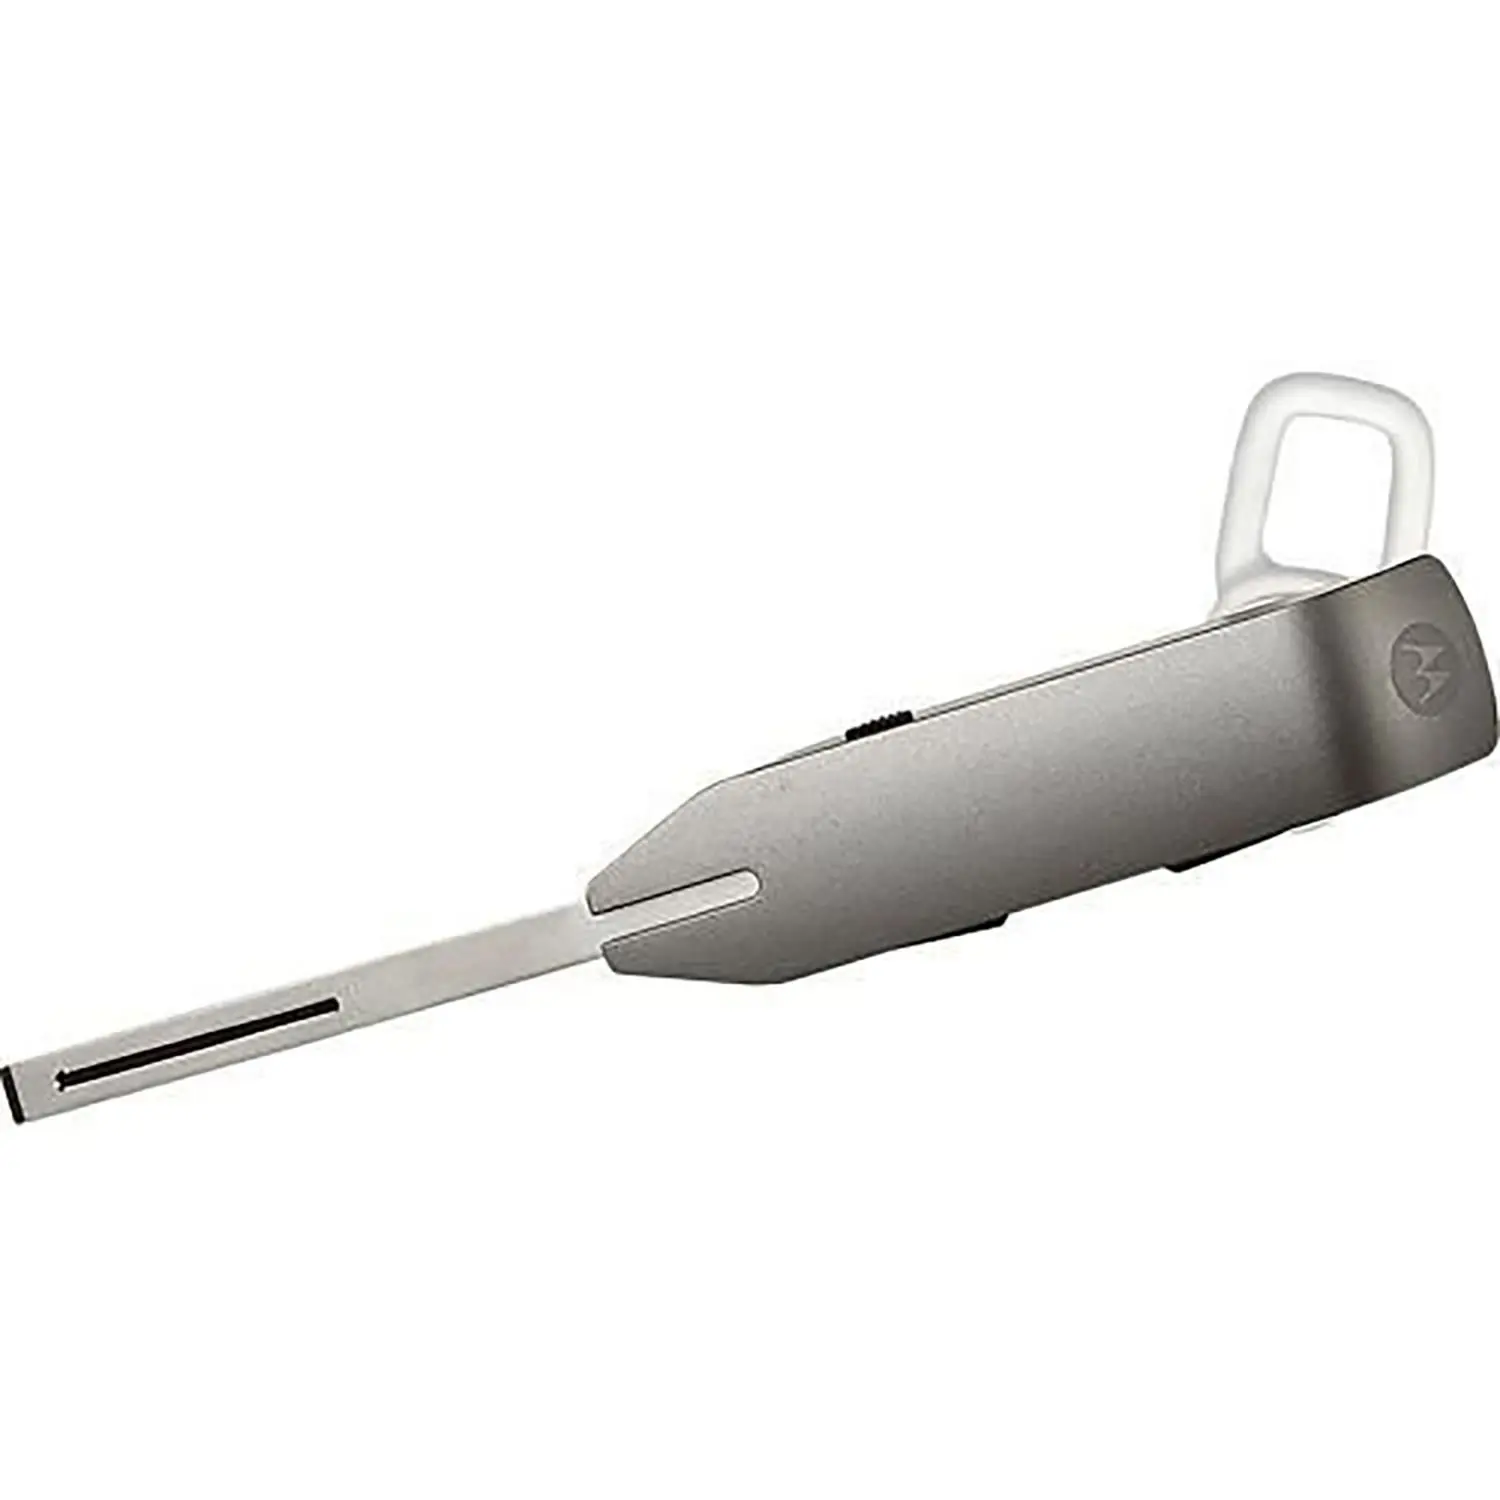 Buy Motorola Whisper HZ850 Universal Bluetooth Headset Retail Package Silver in Cheap Price on